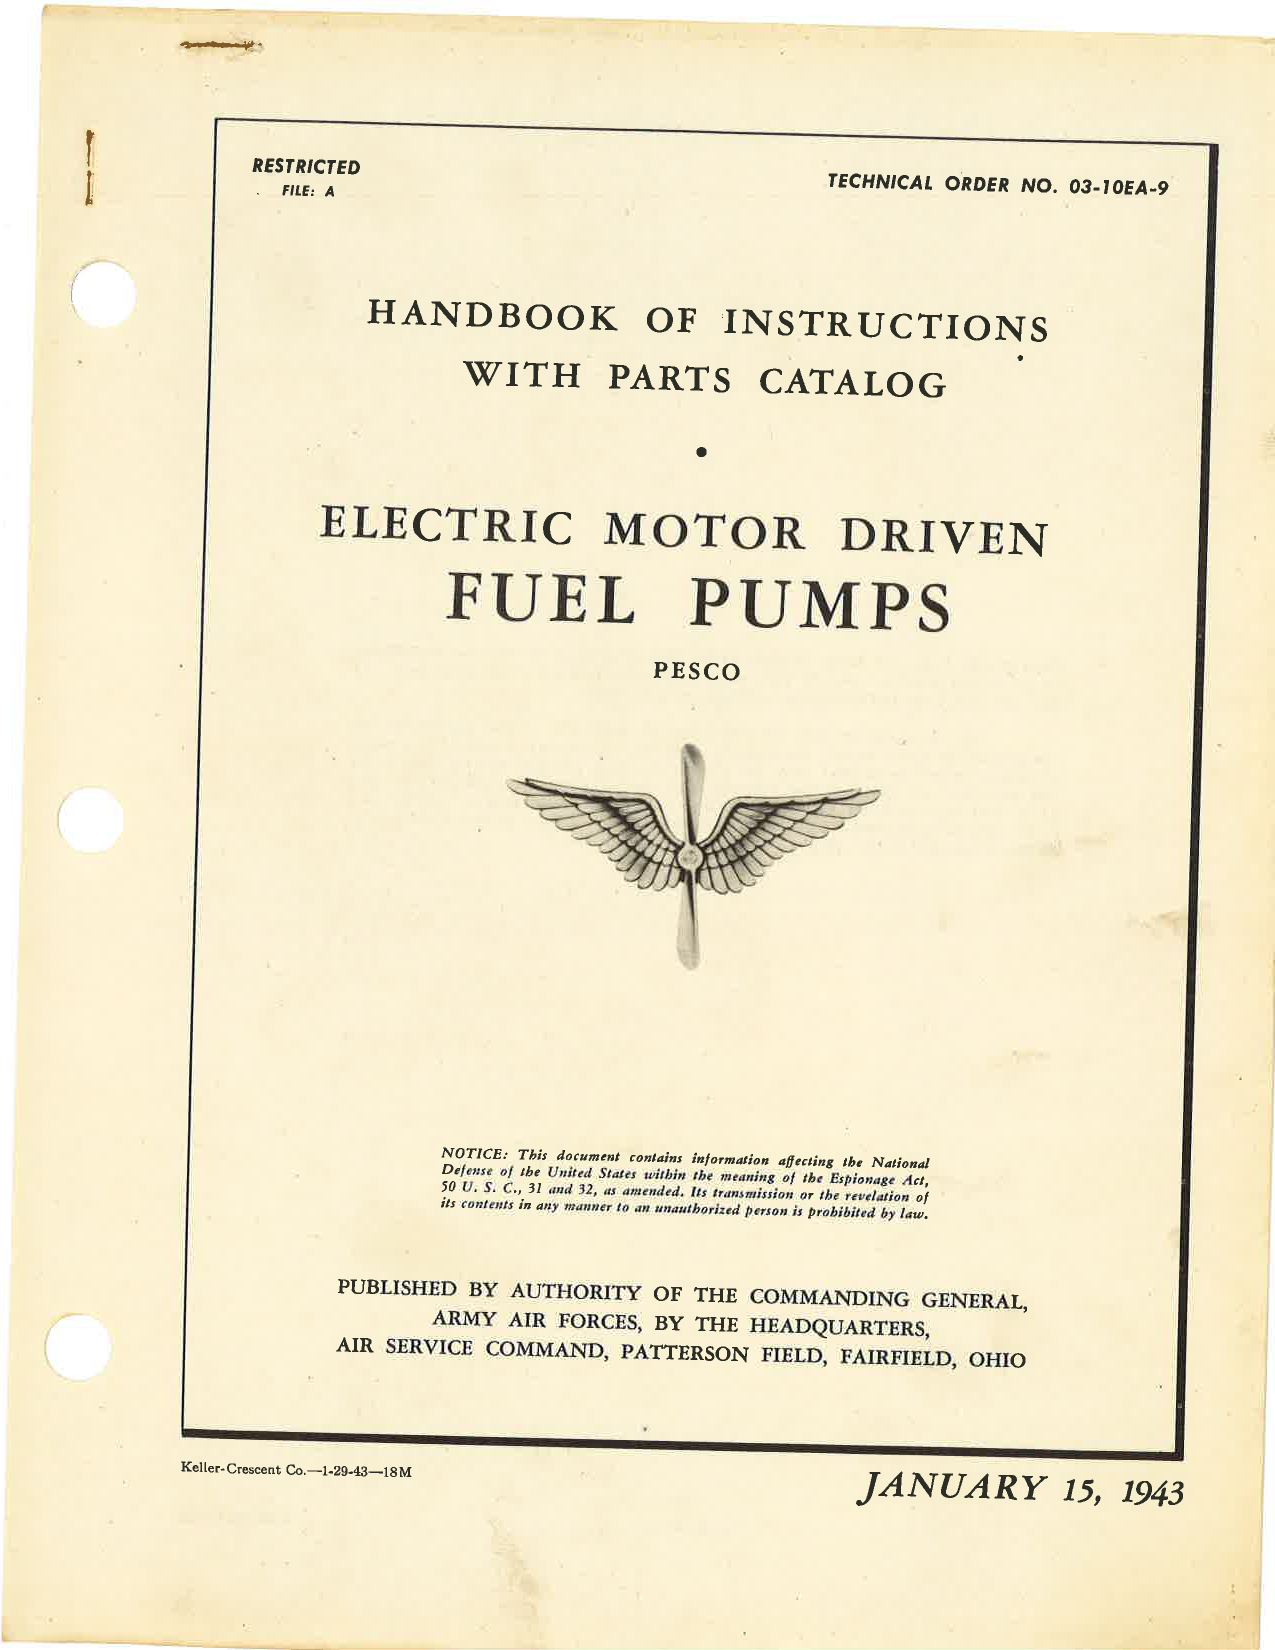 Sample page 1 from AirCorps Library document: Handbook of Instructions with Parts Catalog for Electric Motor Driven Fuel Pumps